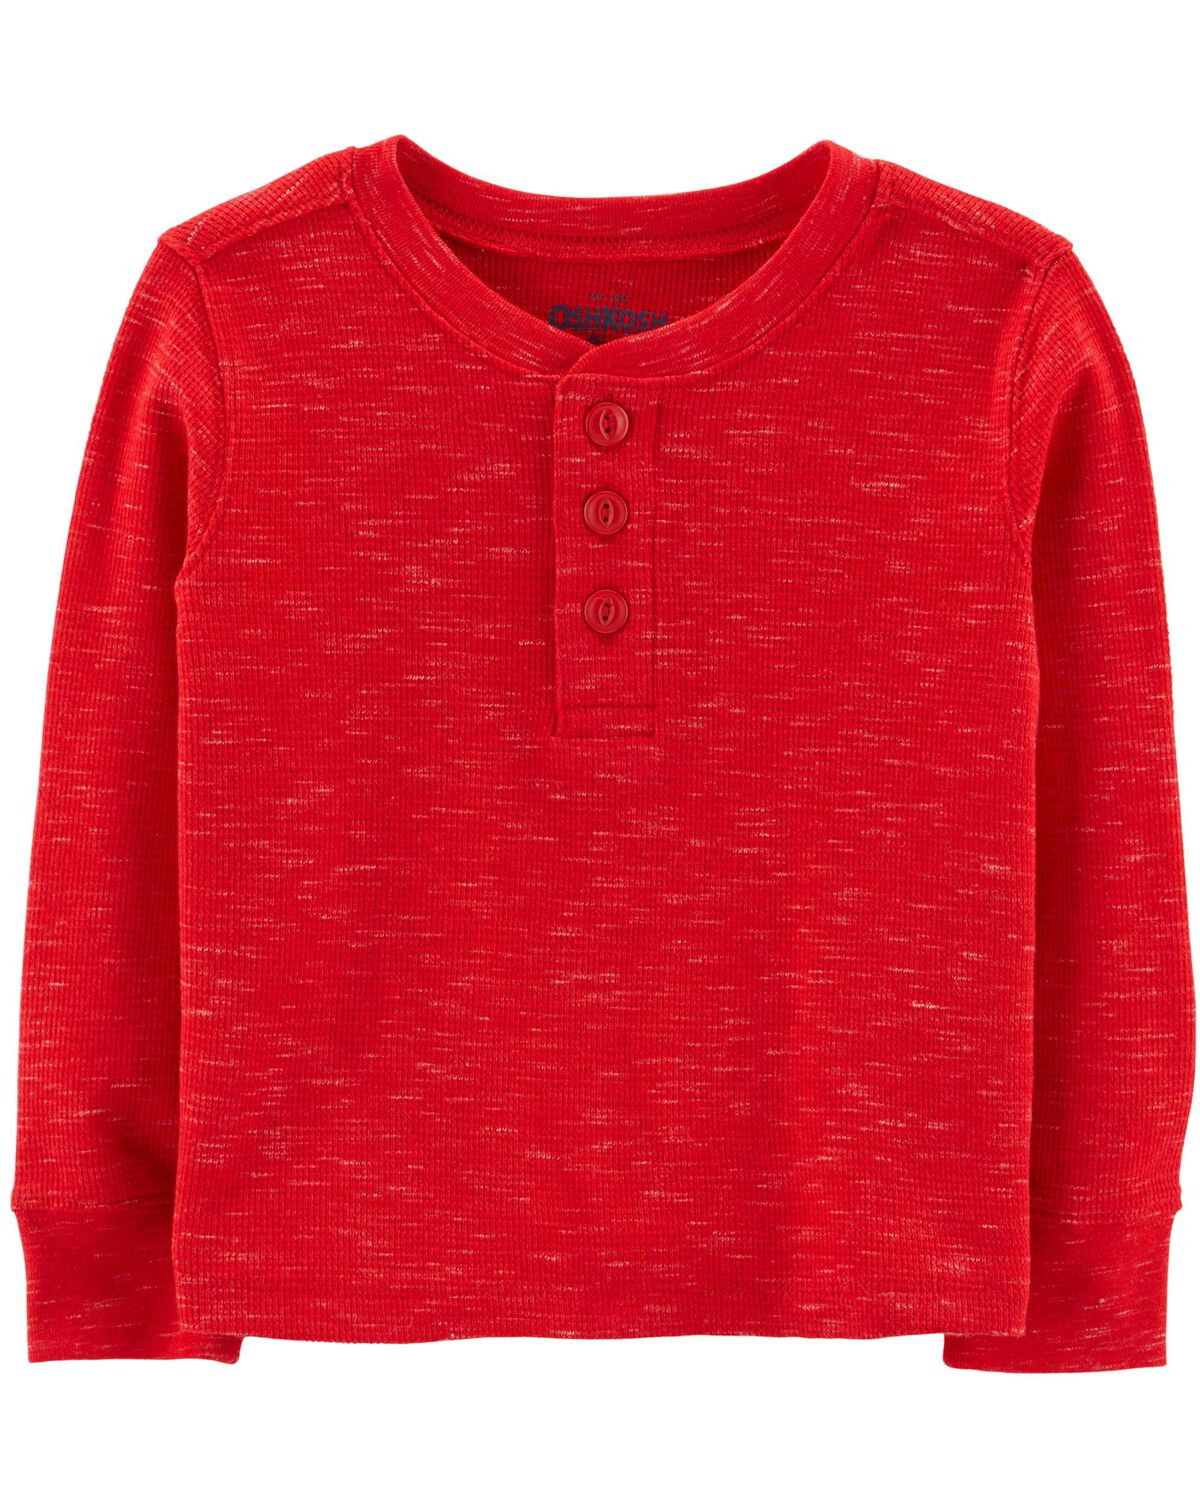 Thermal Henley Tee, Red, hi-res